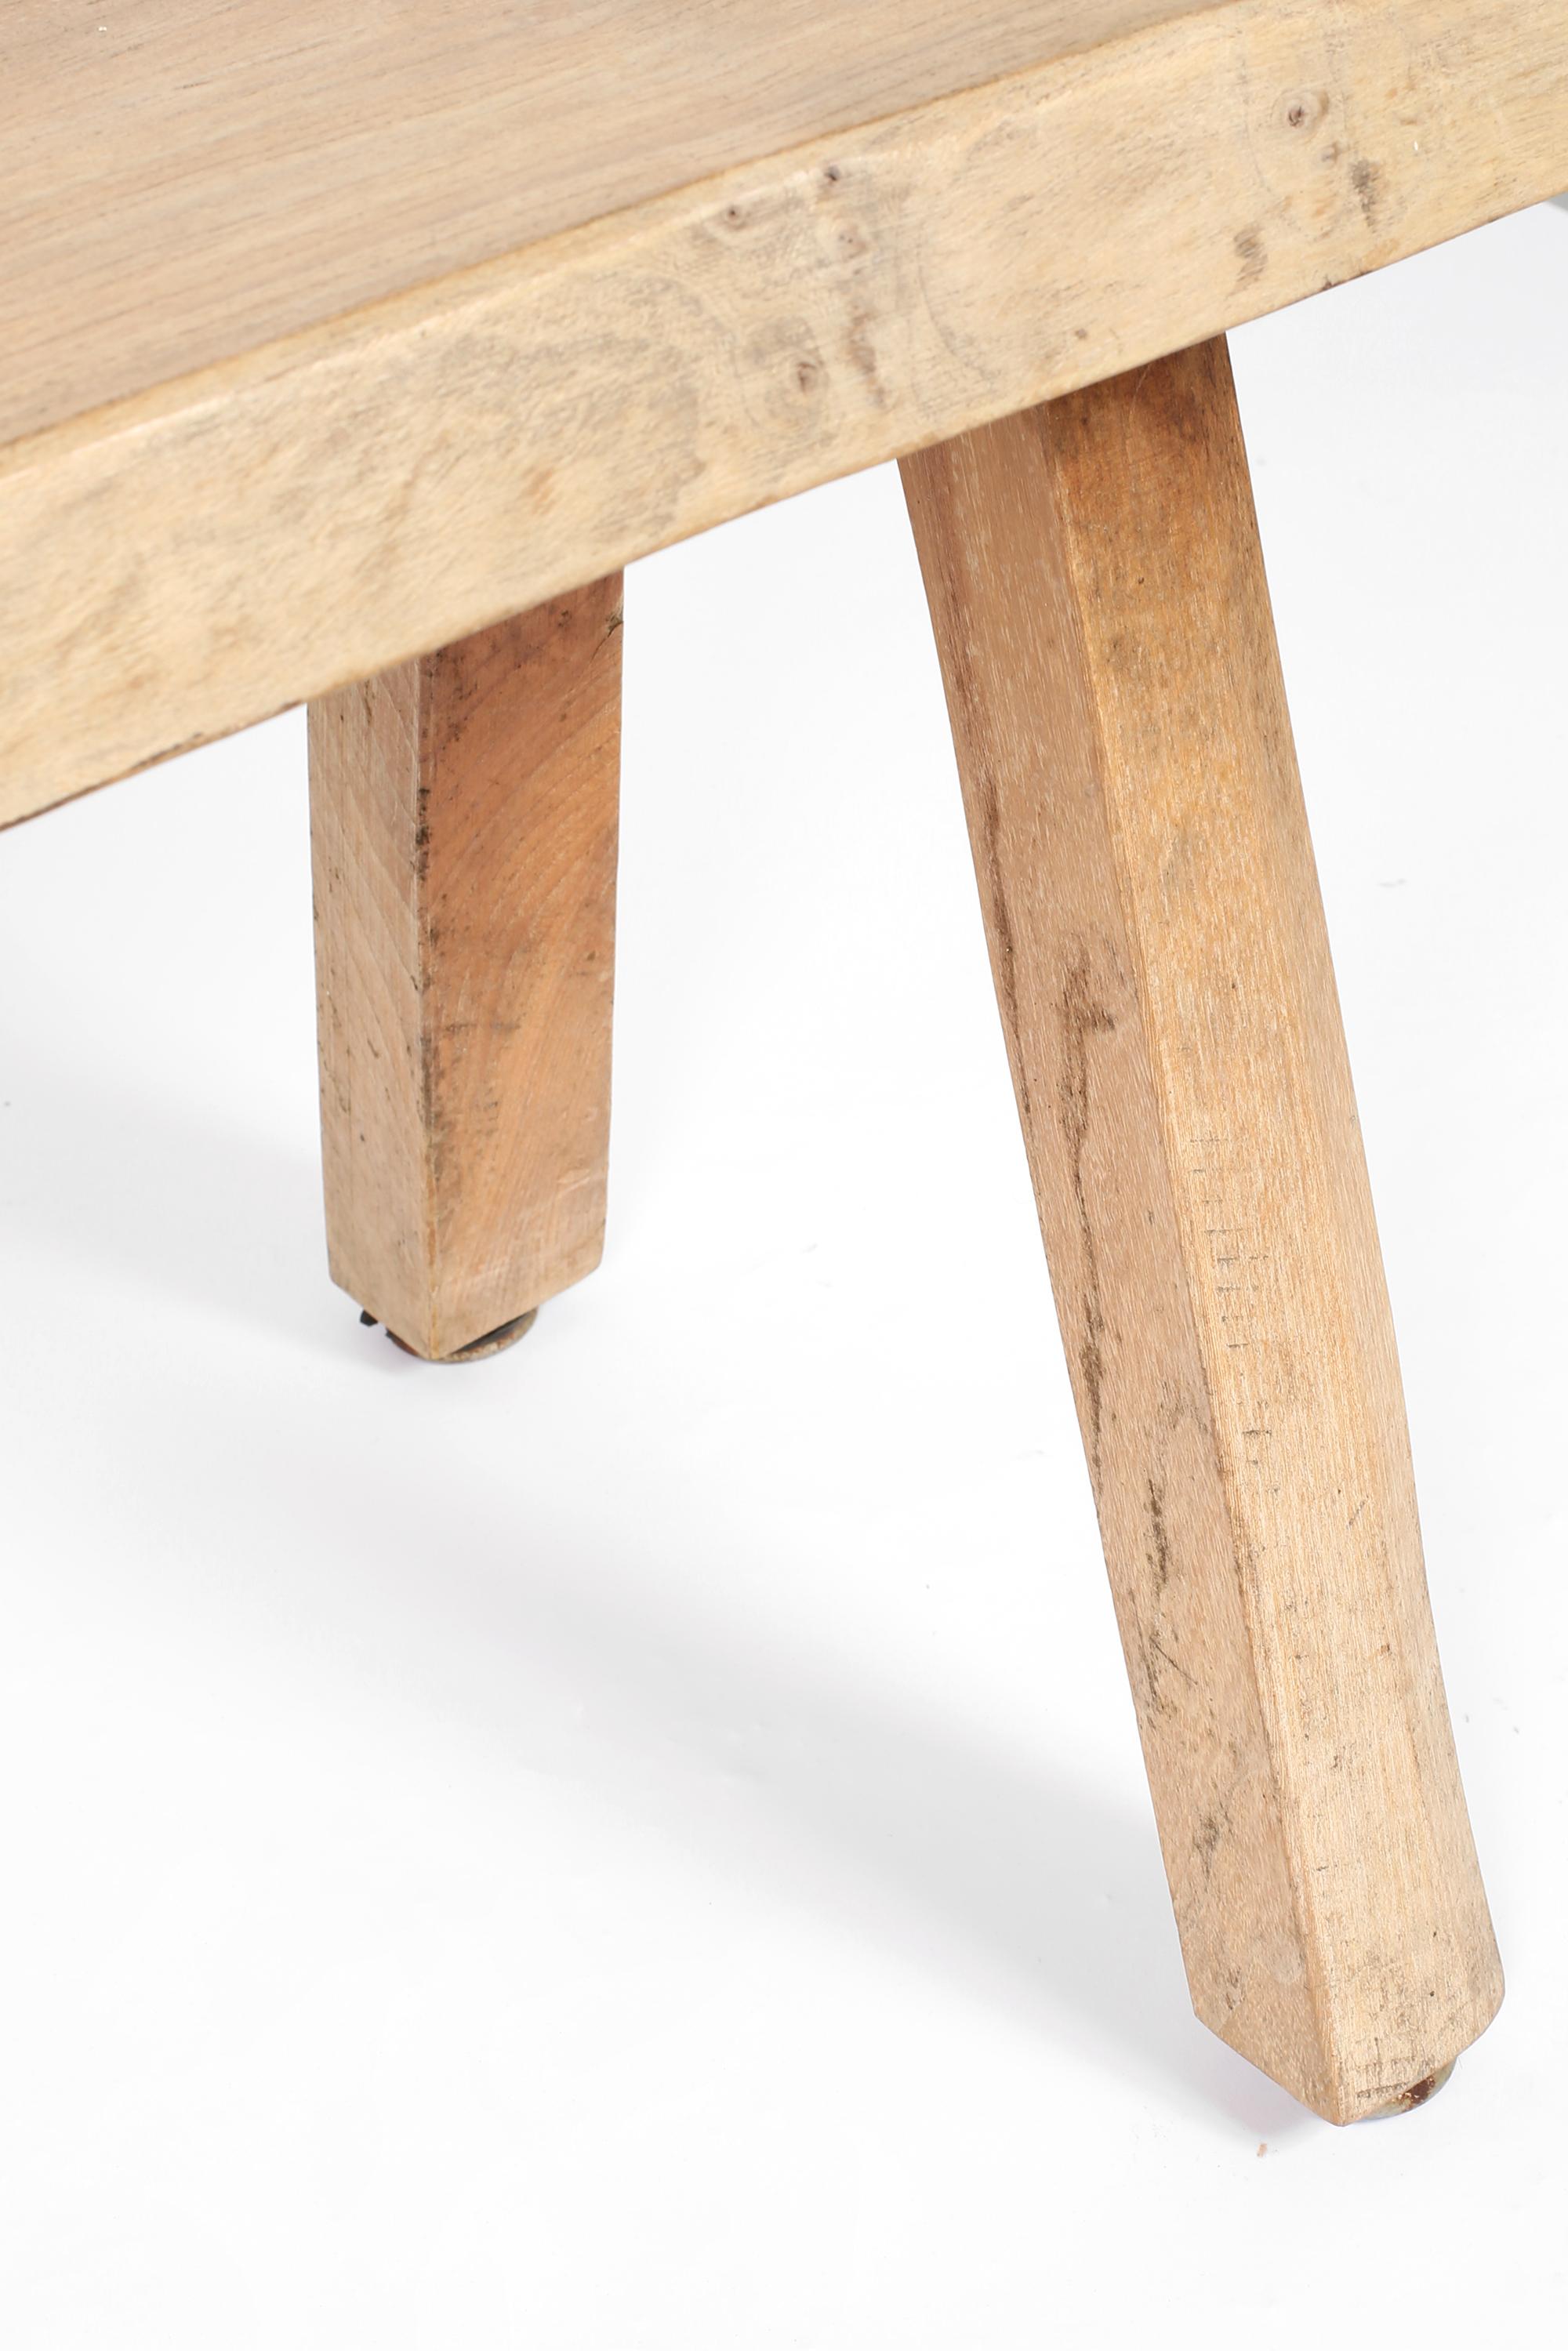 Solid Elm Bench Attributed to Olavi Hanninen, C. 1960s For Sale 3